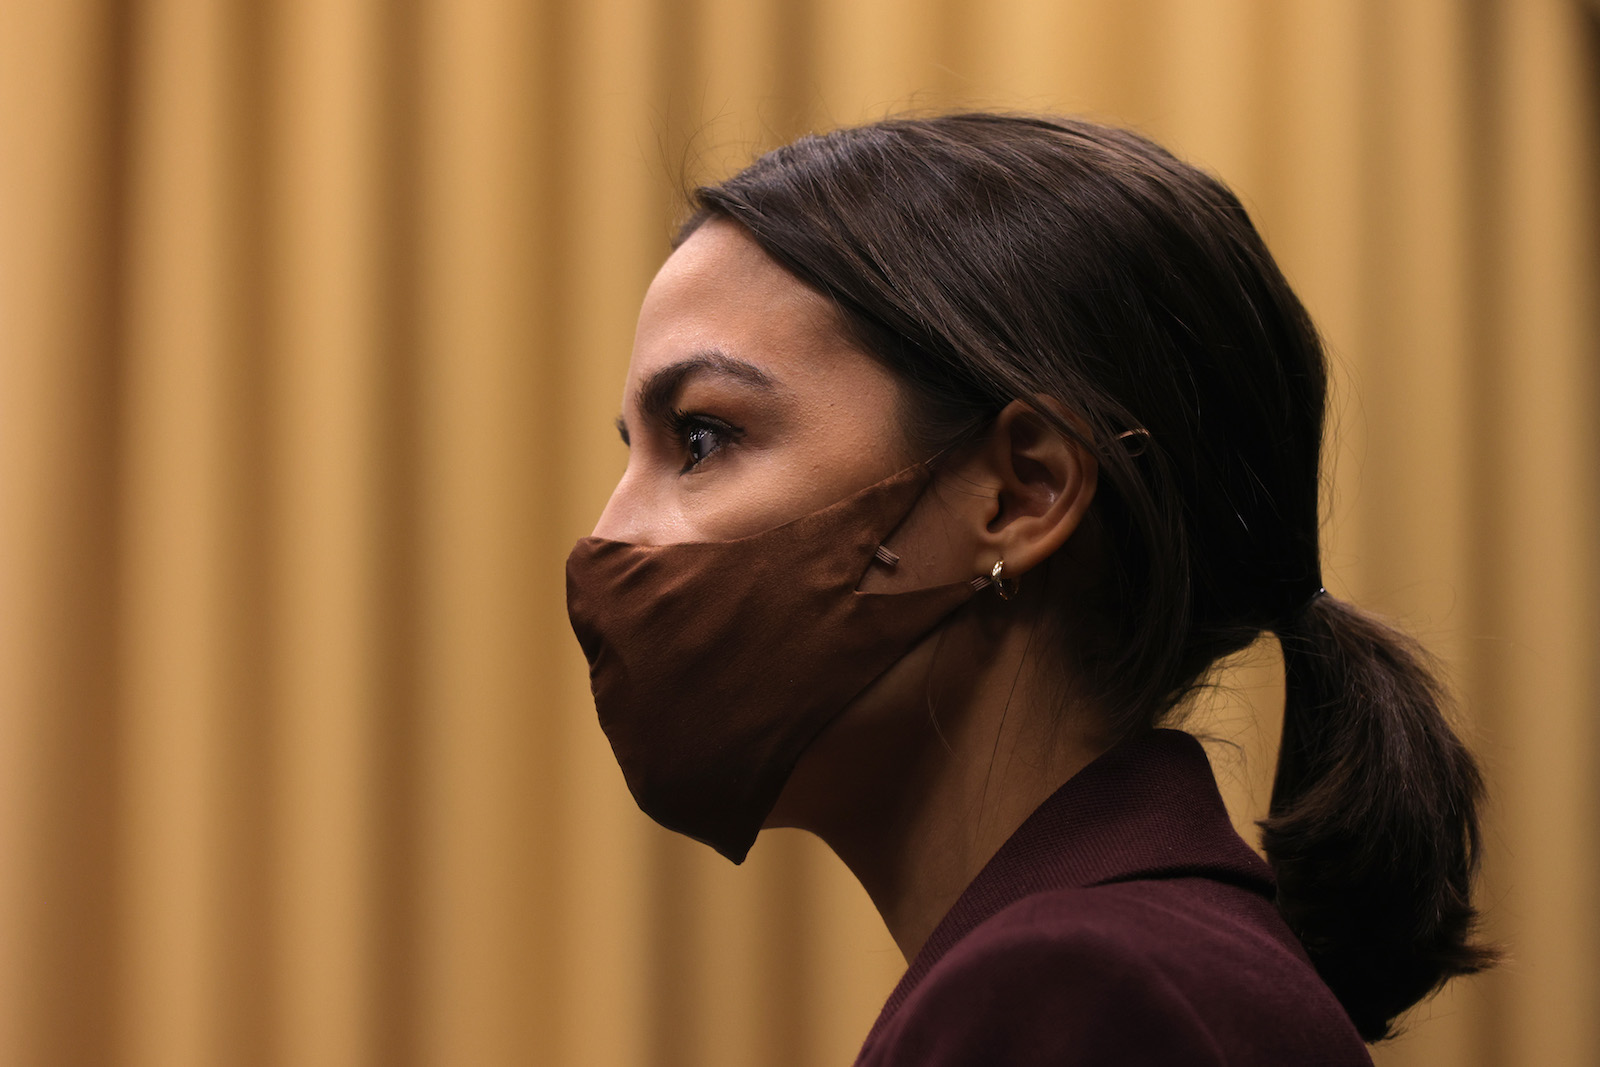 WASHINGTON, DC - MARCH 18: U.S. Rep. Alexandria Ocasio-Cortez (D-NY) listens during a news conference to introduce the "Puerto Rico Self-Determination Act of 2021" at Rayburn House Office Building on Capitol Hill March 18, 2021 in Washington, DC. Photo: Alex Wong/Getty Images